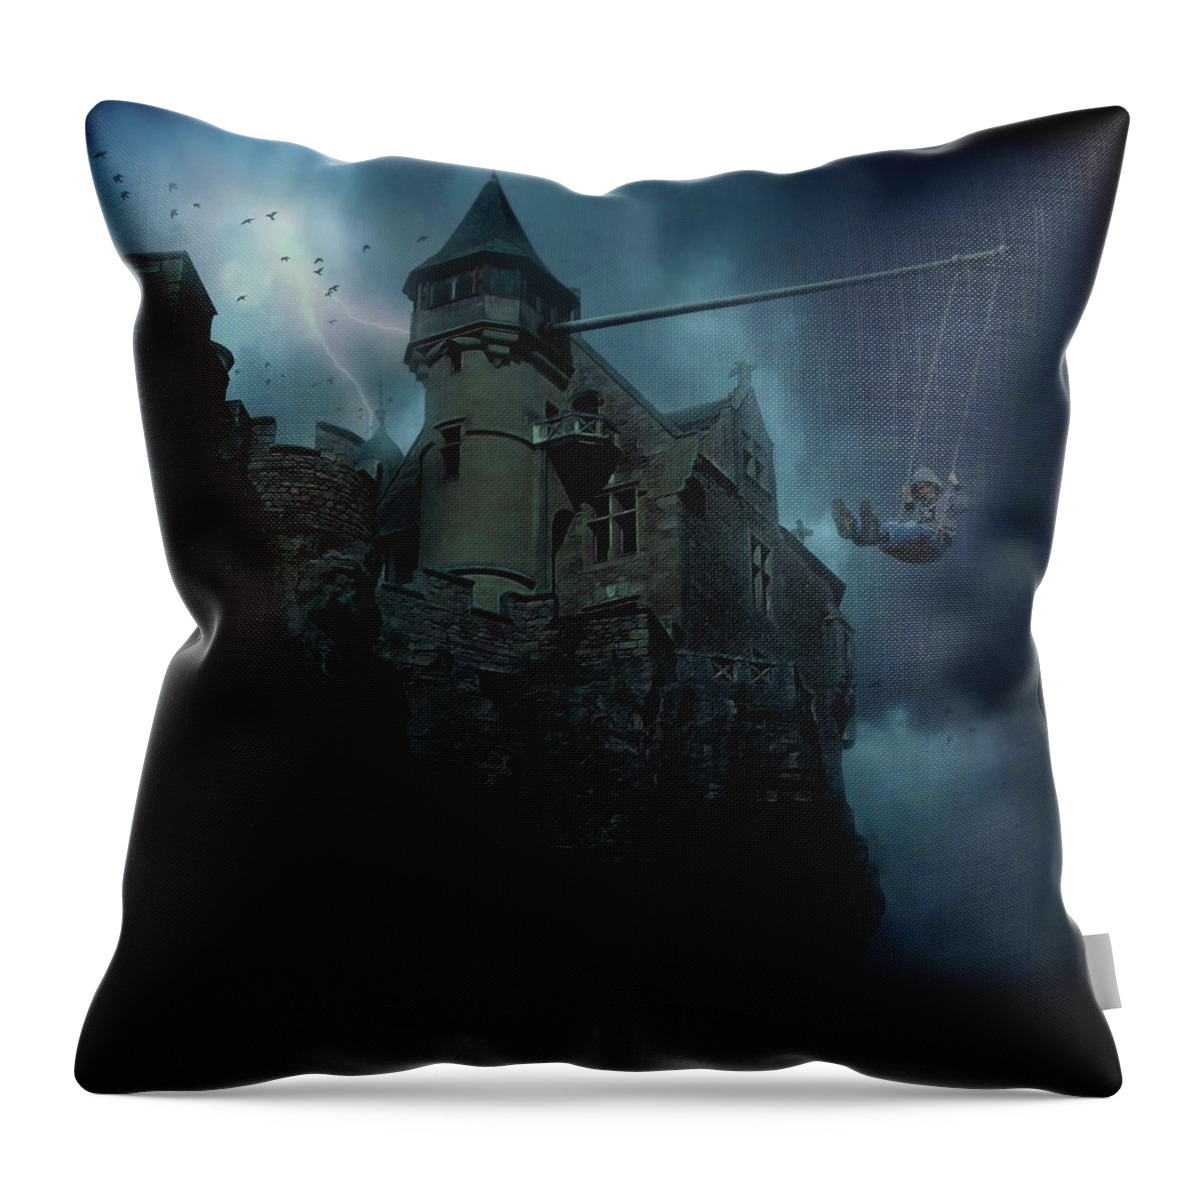 Pole Throw Pillow featuring the photograph Boy On A Swing Hanging On The Pole by Win-initiative/neleman